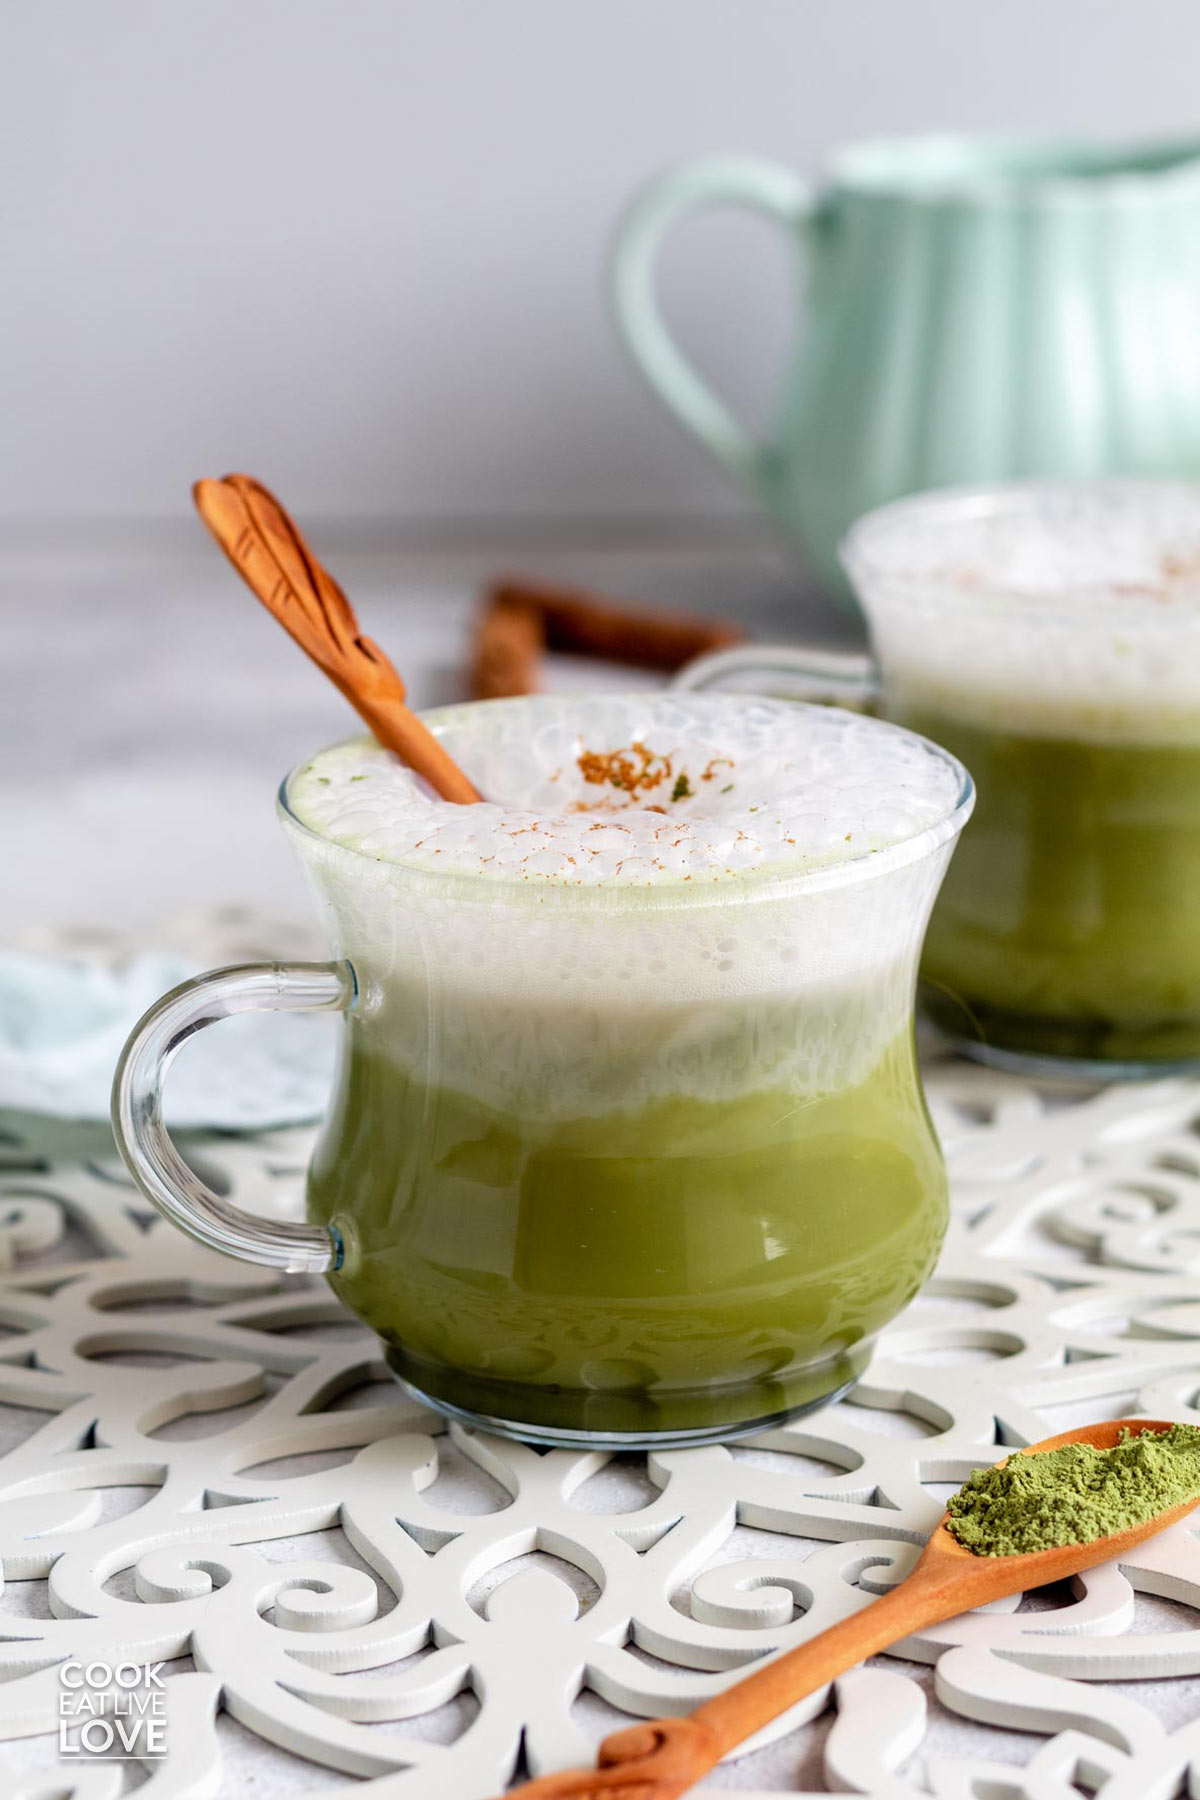 A matcha chai latte in a glass mug on the table.